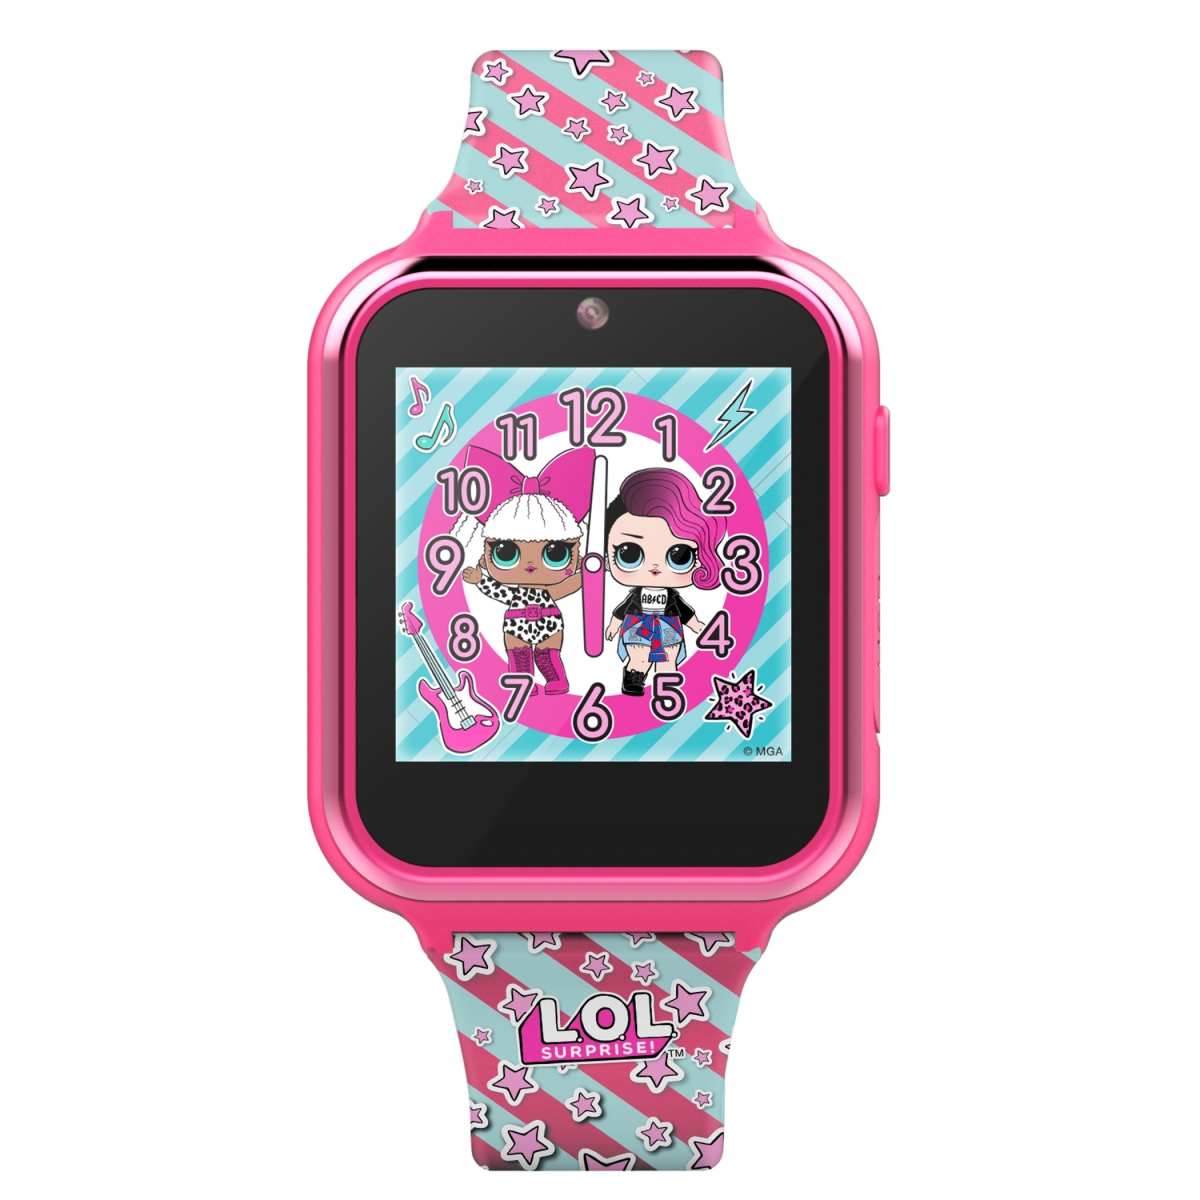 Picture of LOL Dolls 849121 Lol Suprise Dolls Interactive Kids Watch